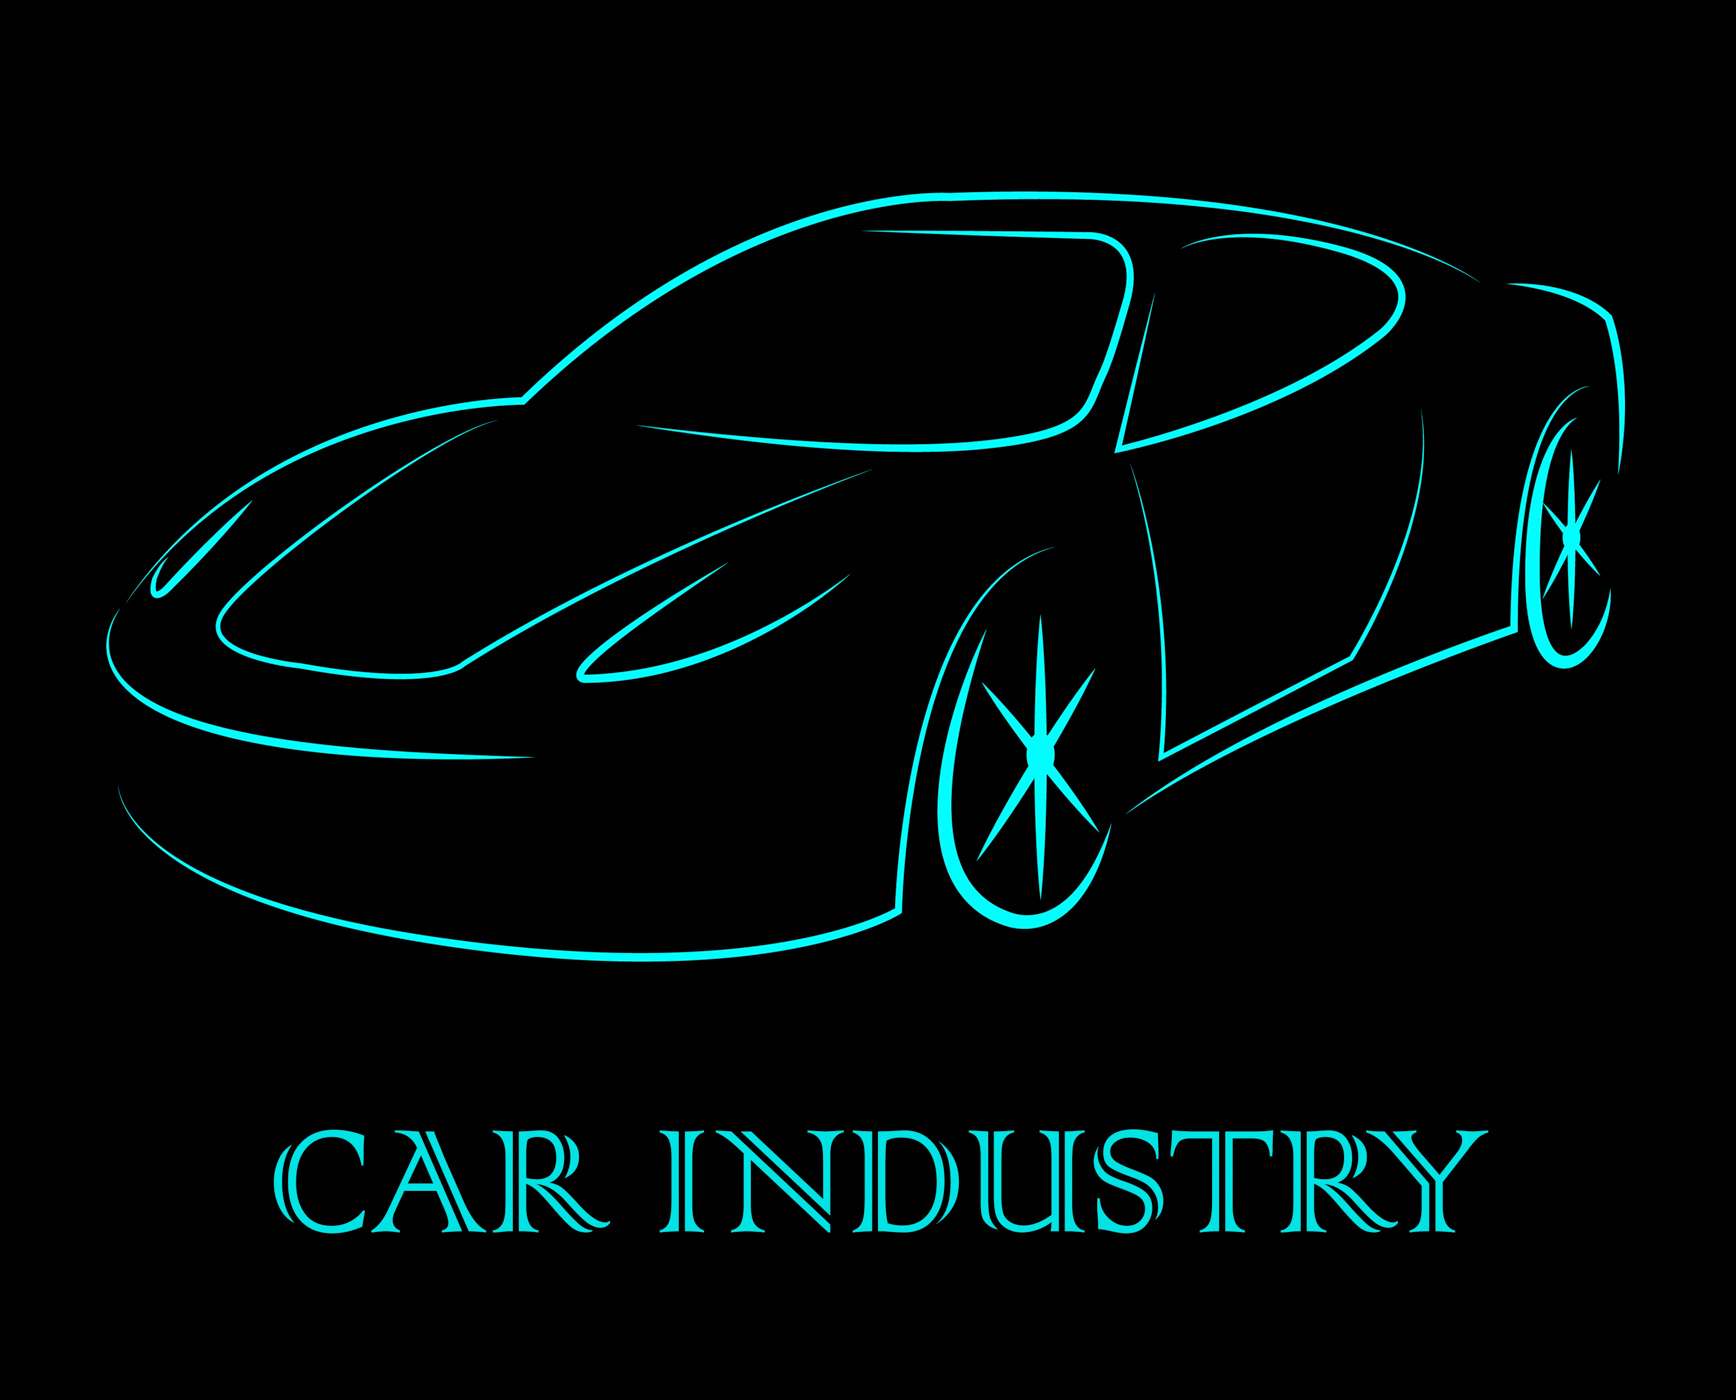 Car industry indicates industrial transport and motor photo